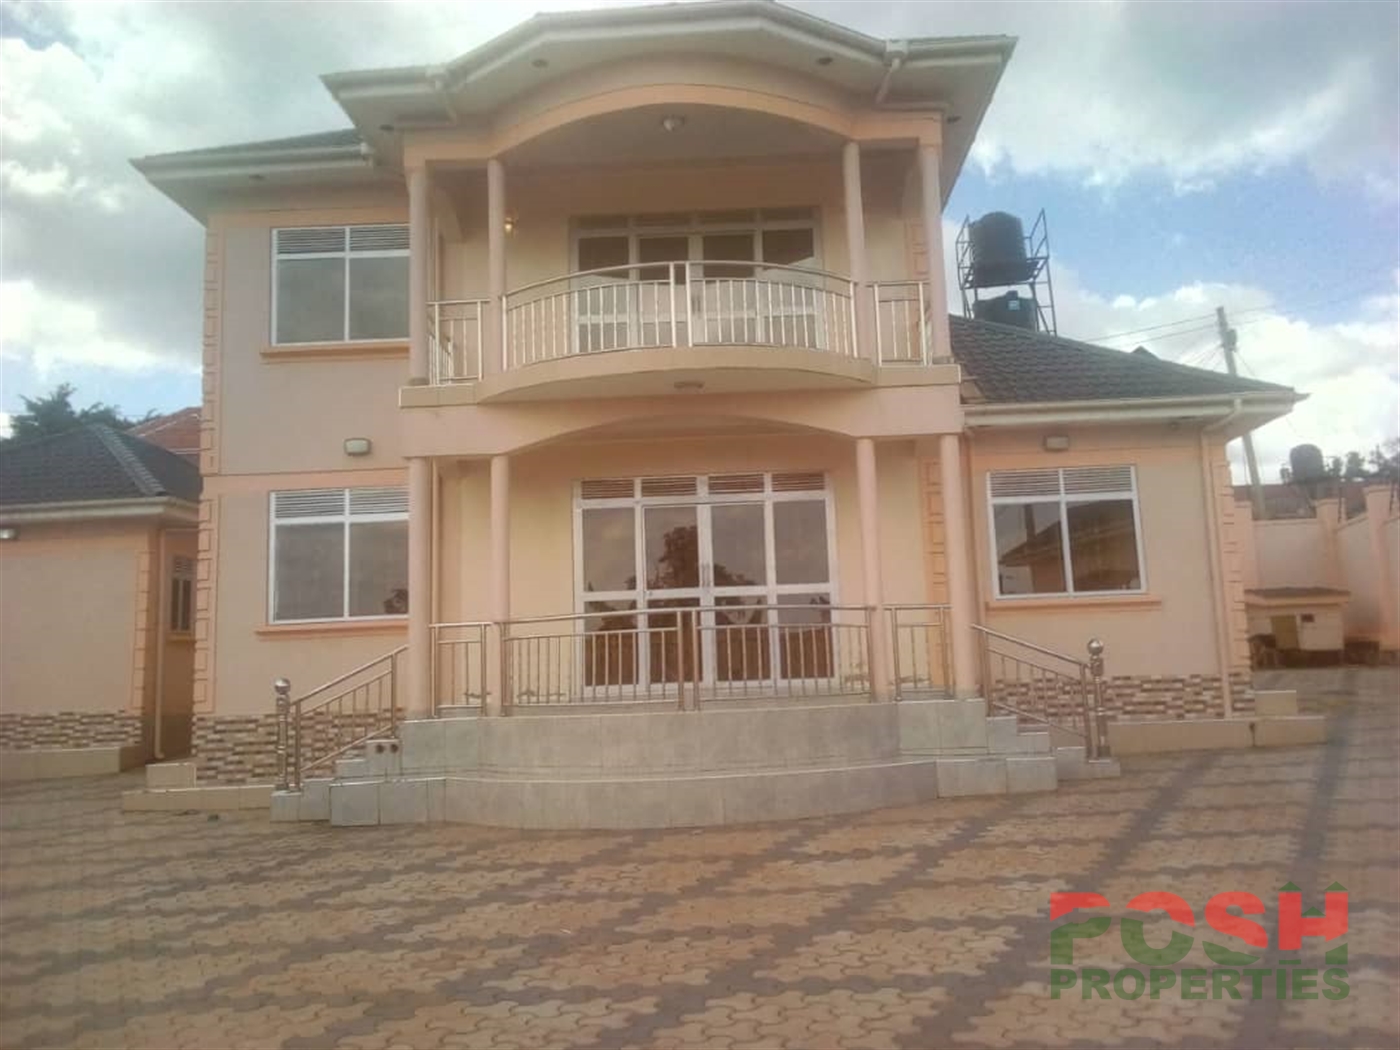 Mansion for sale in Bulenga Wakiso